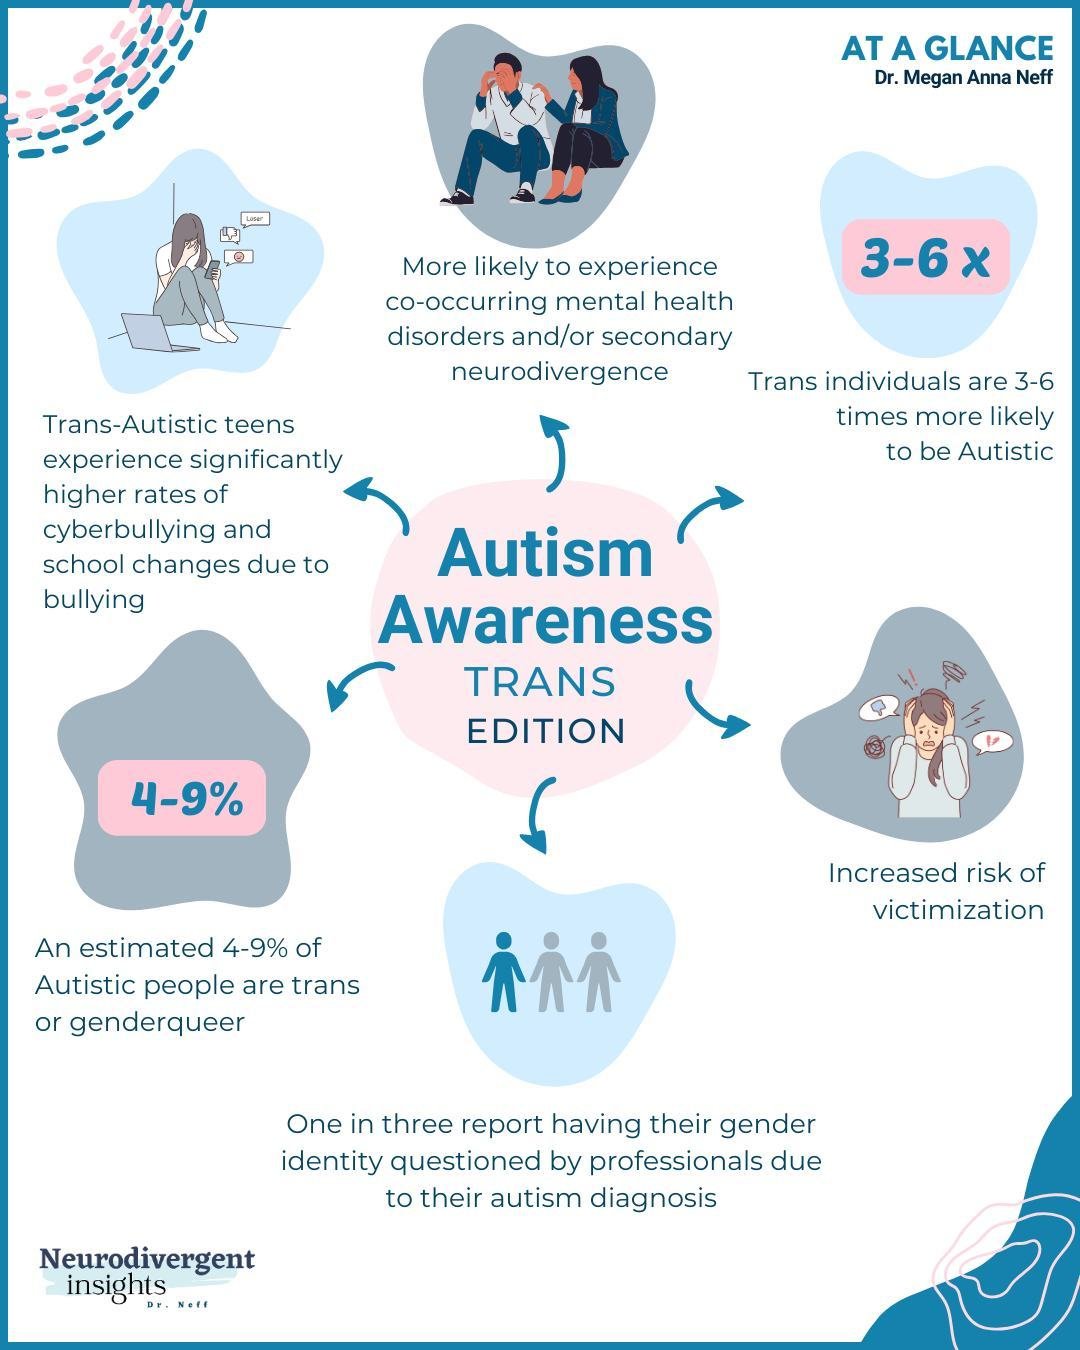 Part 2 of #AutismAwareness series. ⁠
⁠
On April 2 this year, President Biden officially recognized the date as World Autism Acceptance Day, a change that marks a shift away from the previous focus on Autism Awareness Month. This shift, long advocated